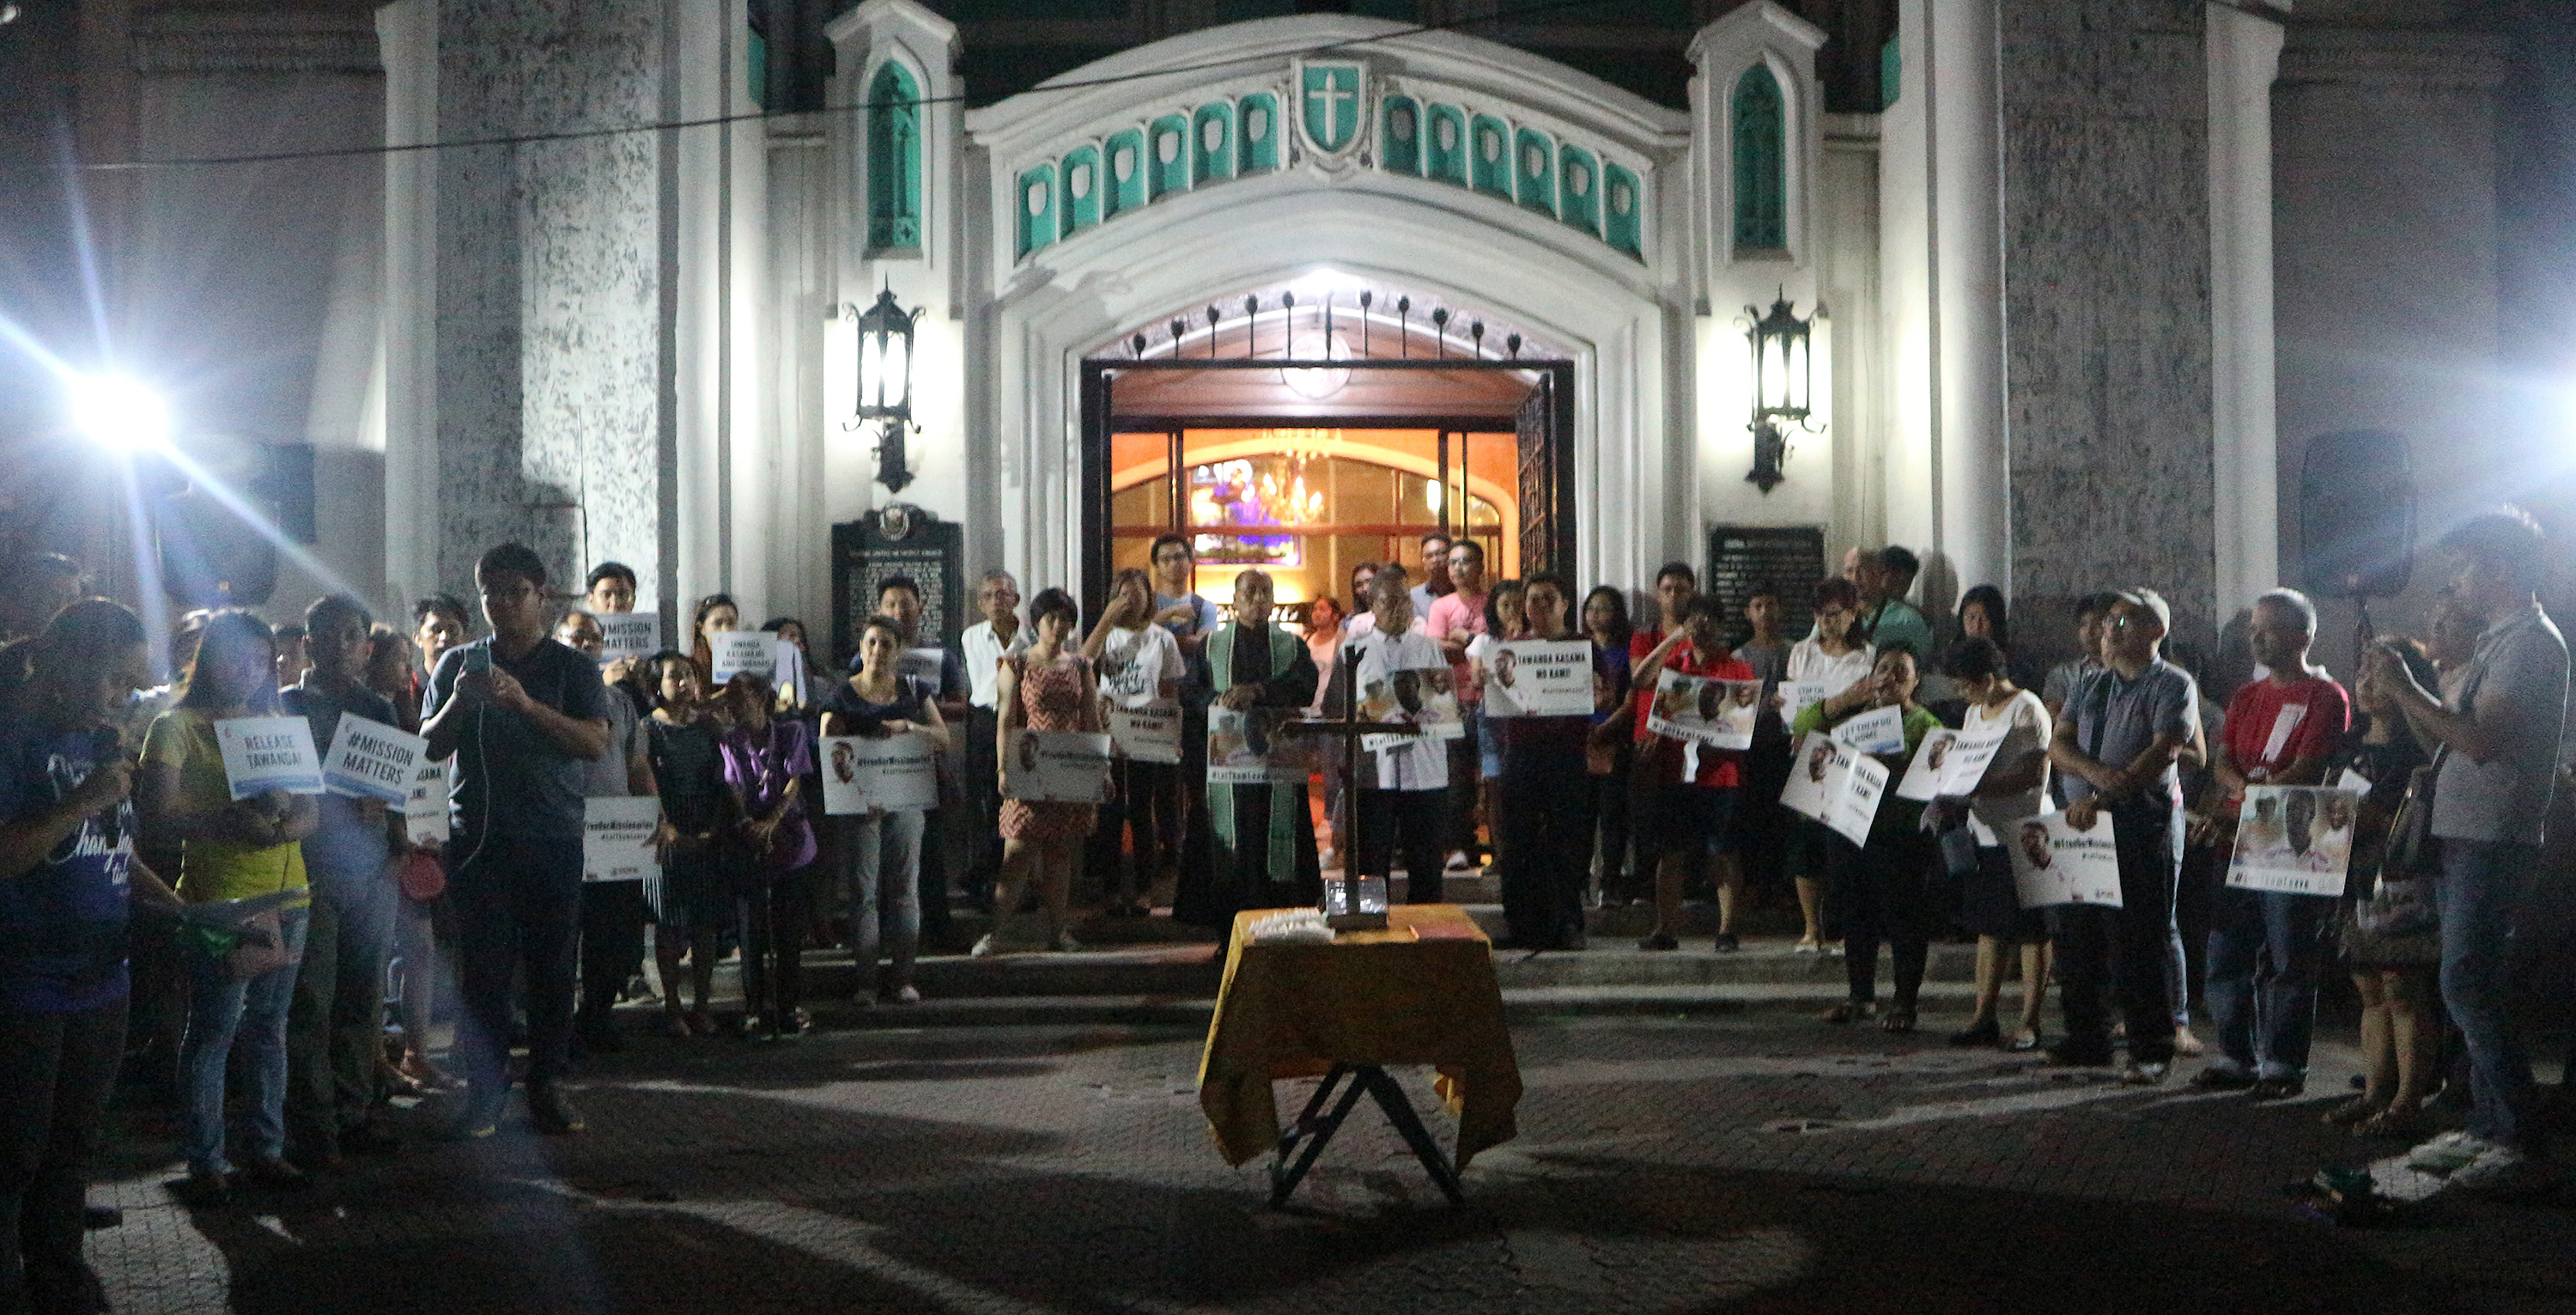 A crowd holds signs outside Central United Methodist Church in Manila in support of the missionaries from the United Methodist Board of Global Ministries detained by the Philippine’s government. Photo courtesy of Gladys Mangiduyo, UMNS.